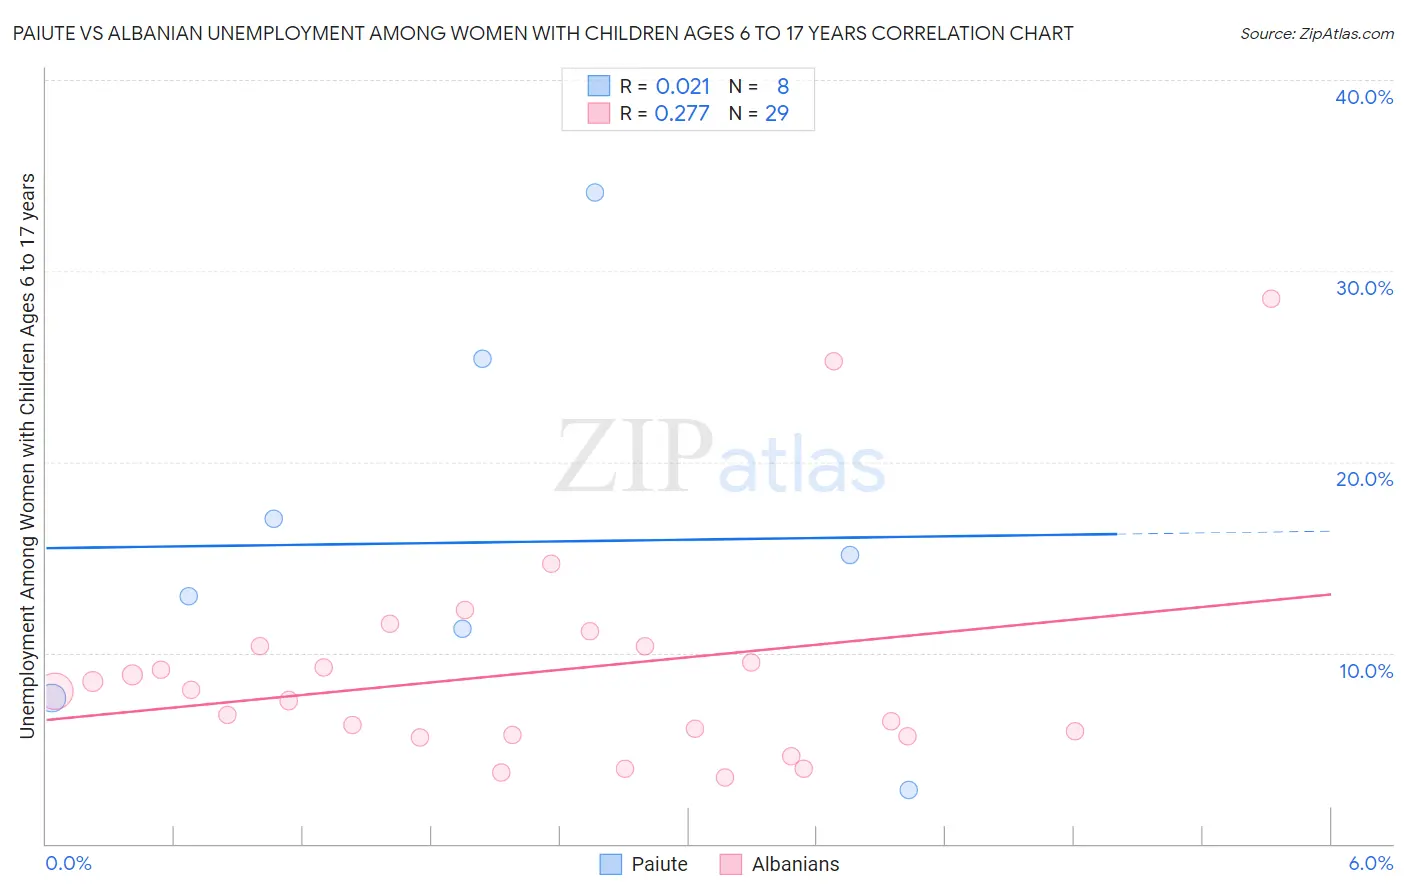 Paiute vs Albanian Unemployment Among Women with Children Ages 6 to 17 years